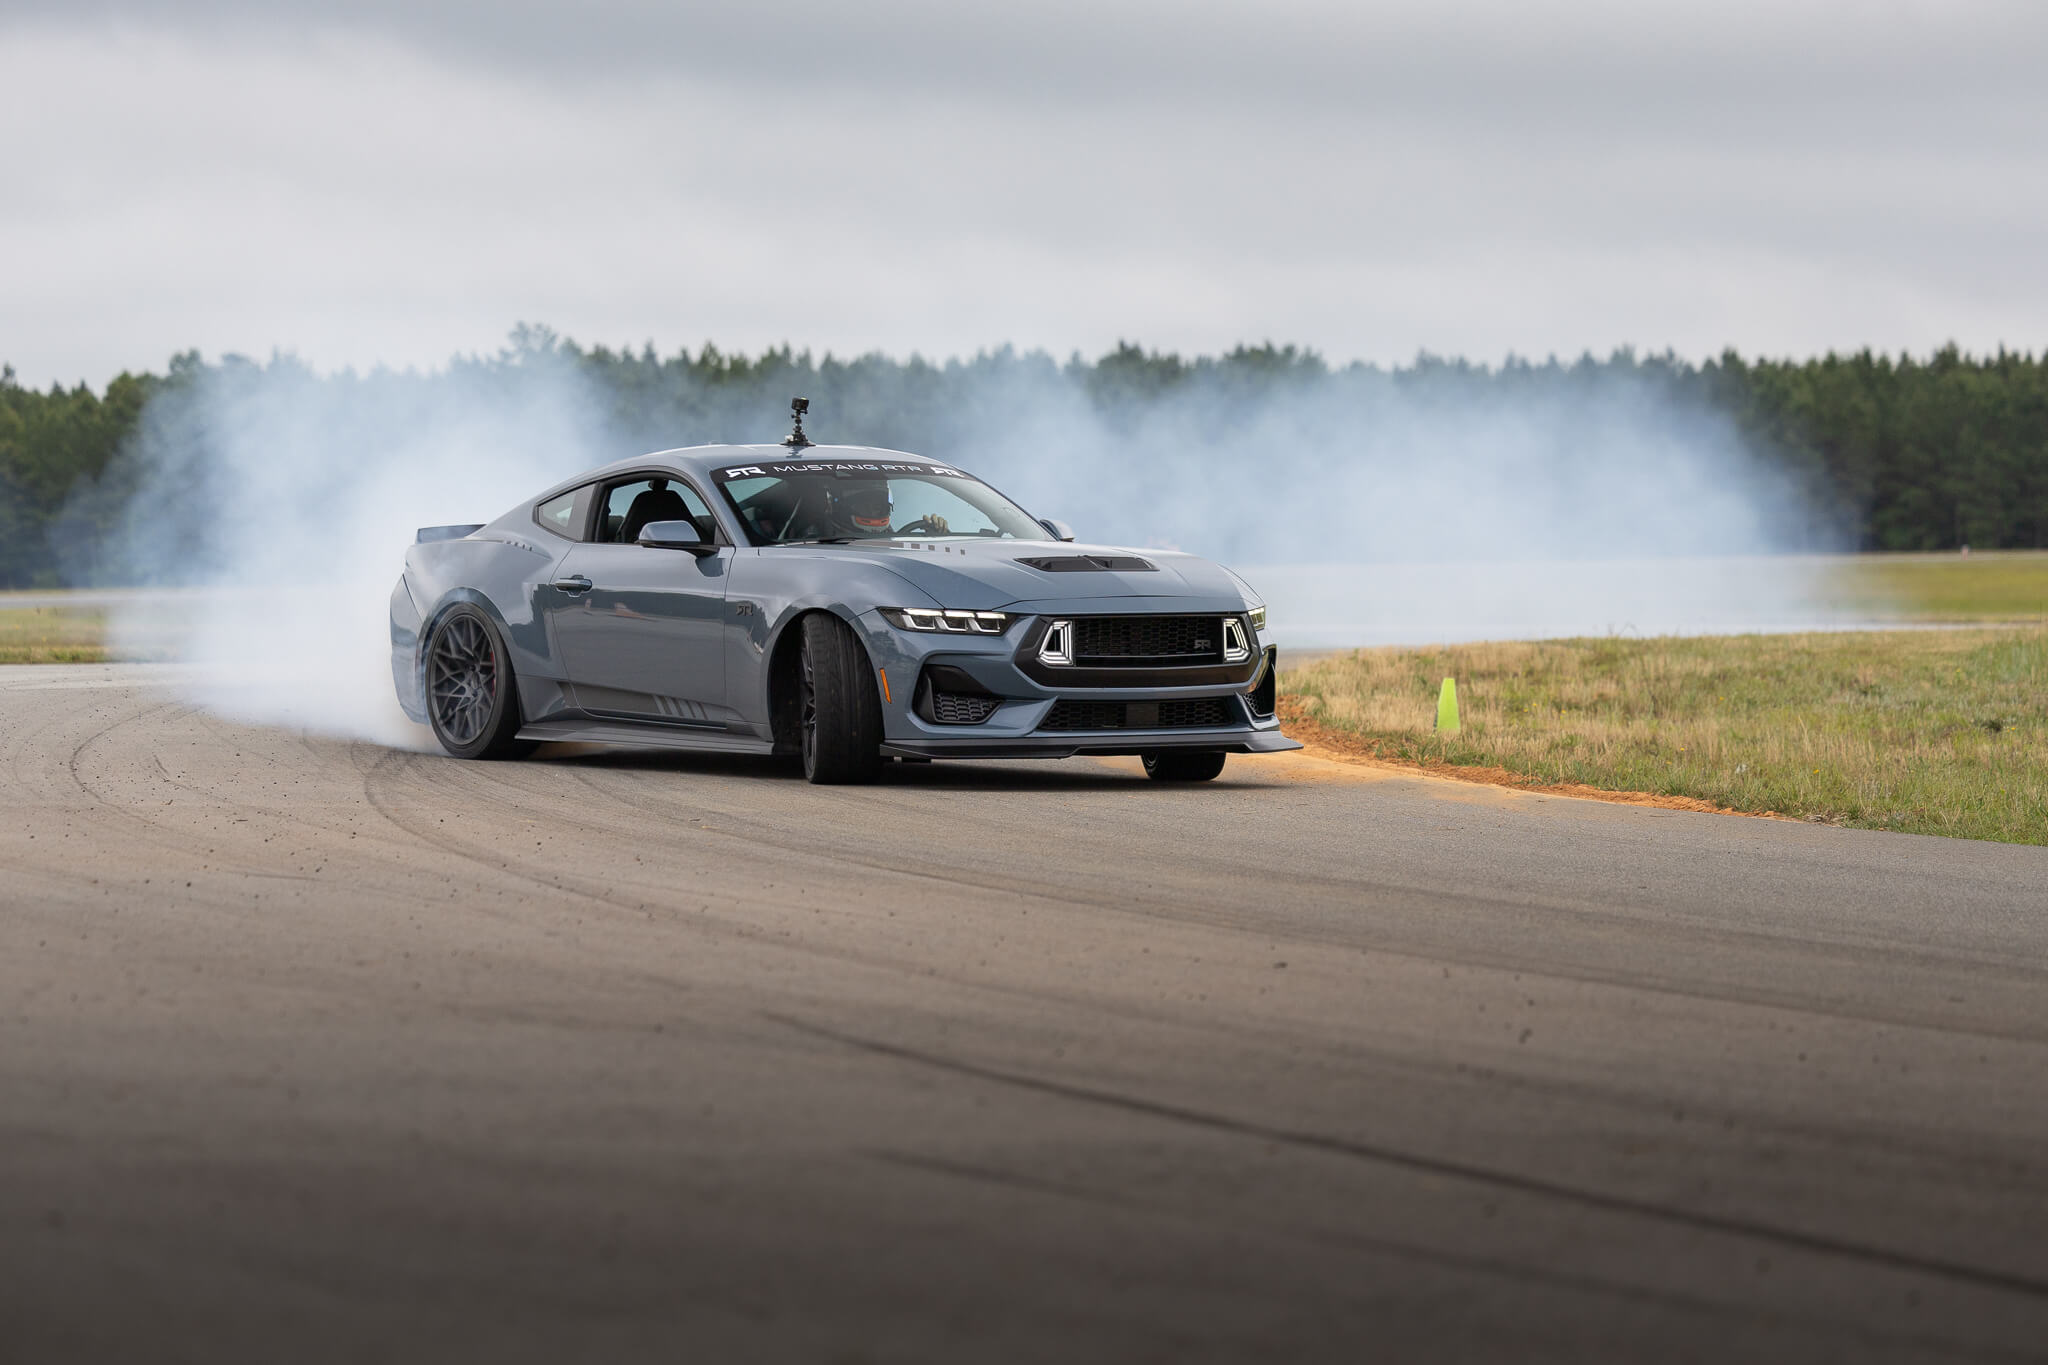 S650 Mustang RTR Vehicles Suspension Validation Testing on the 7th Generation Mustang JCOL5360